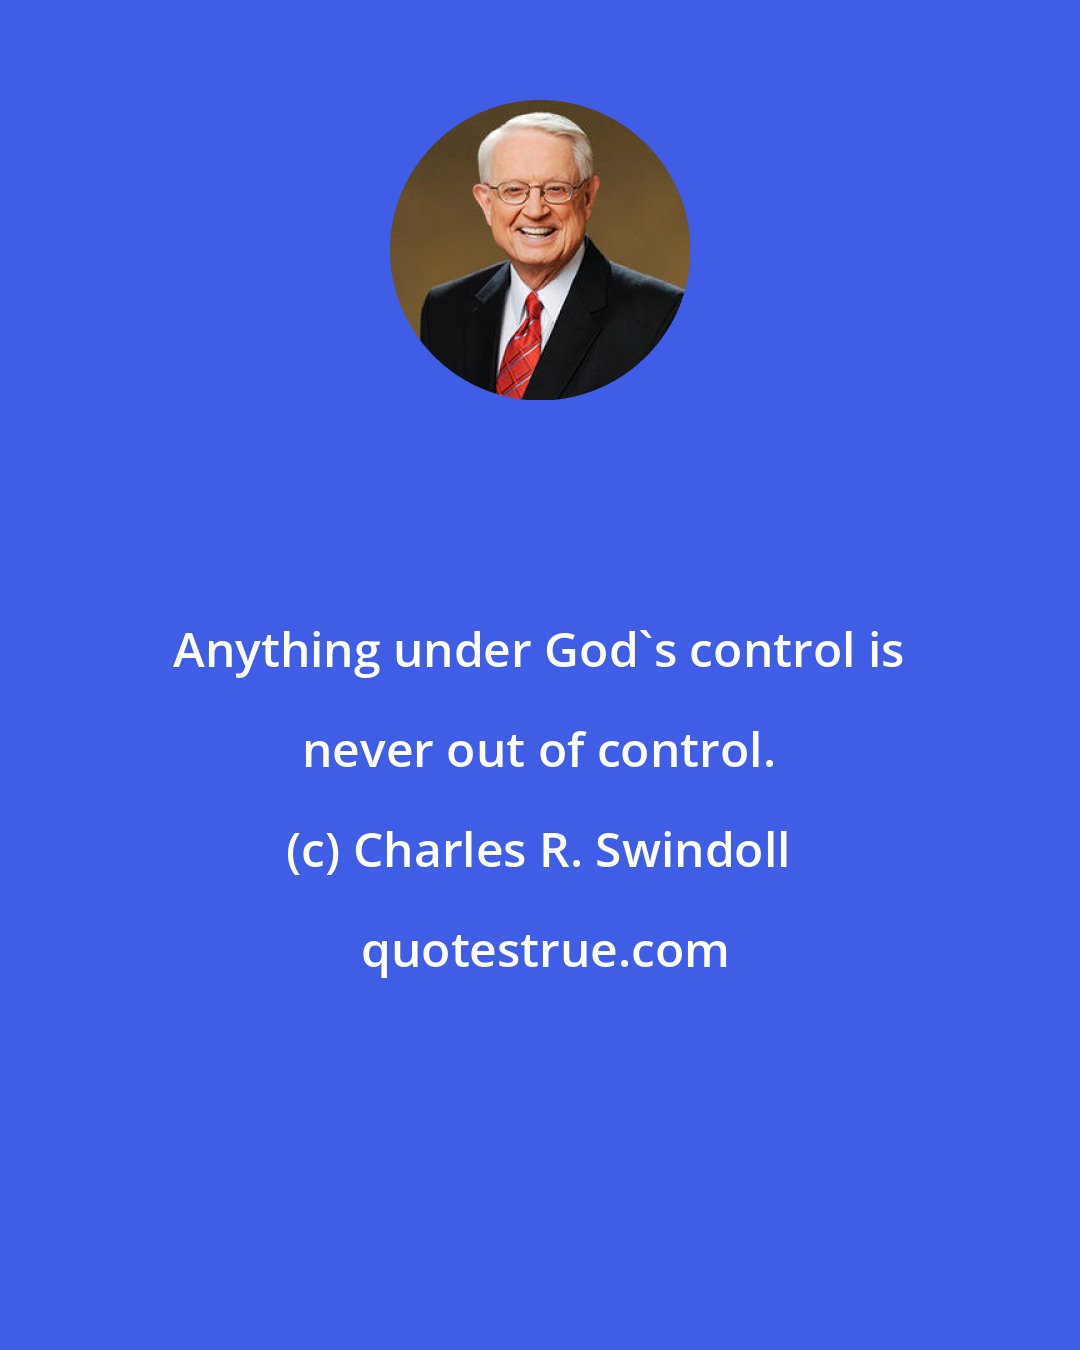 Charles R. Swindoll: Anything under God's control is never out of control.